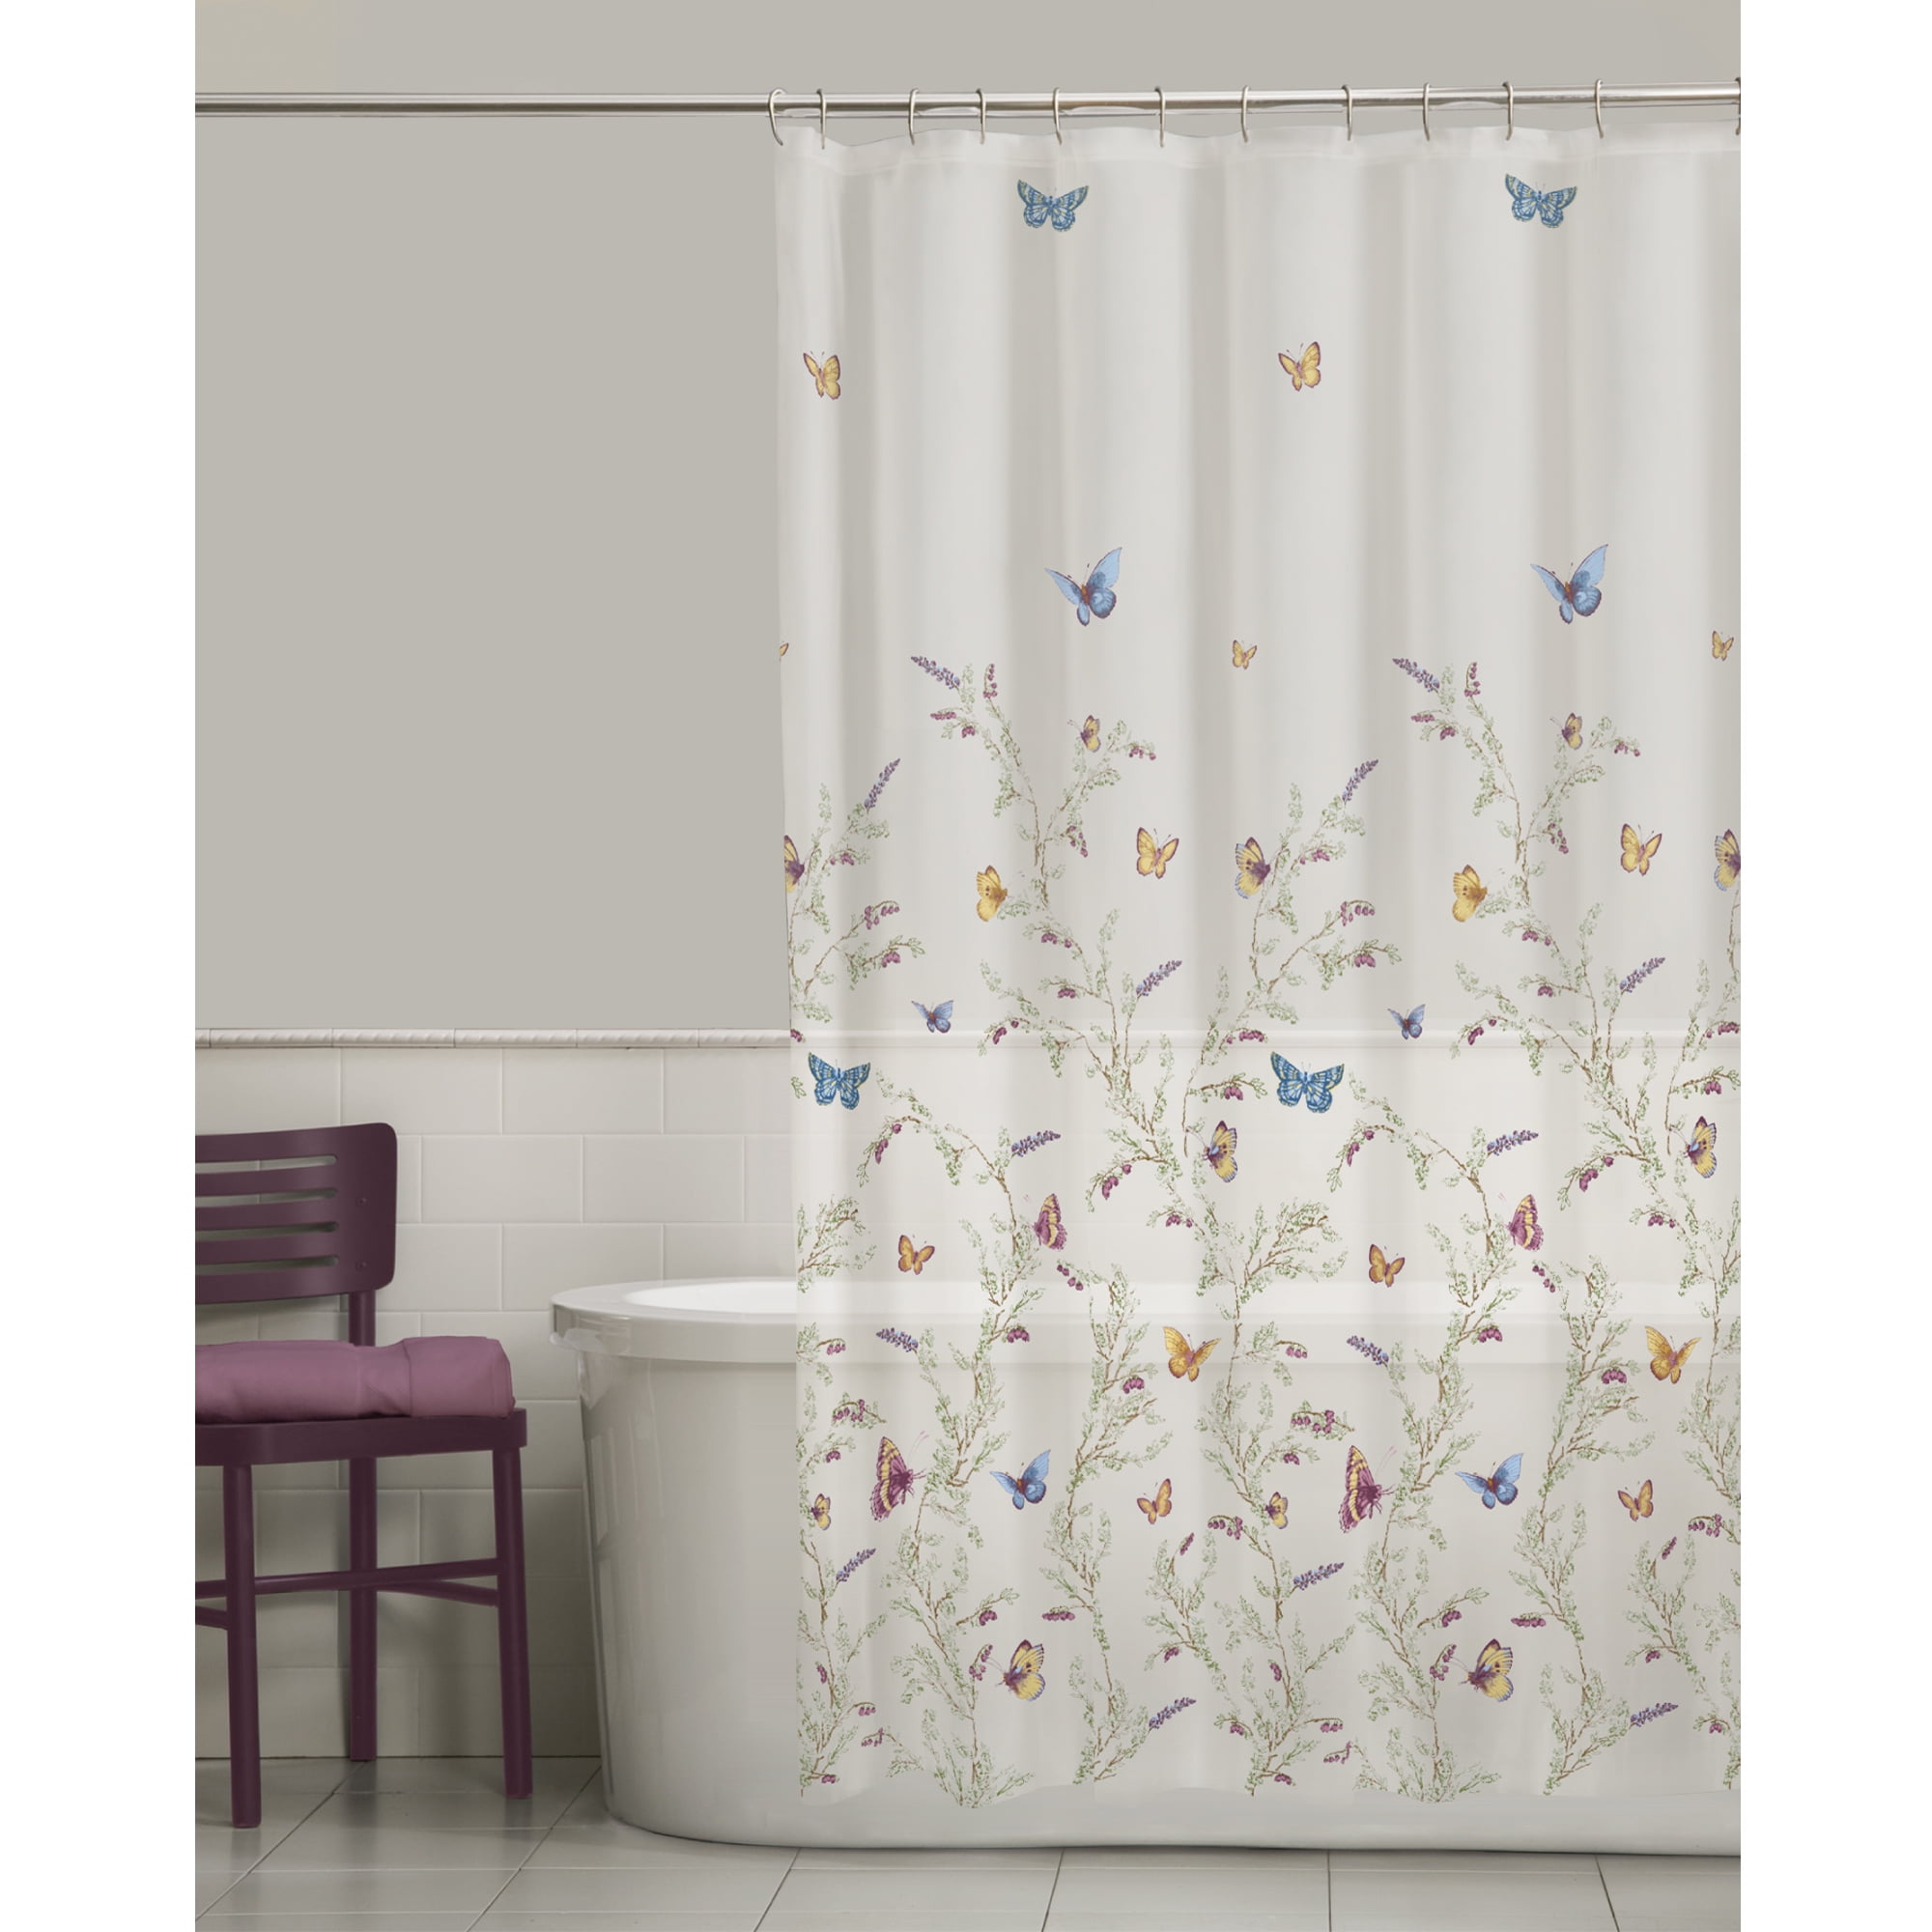 CafePress Dragonfly And Flowers Shower Curtain 1450645970 